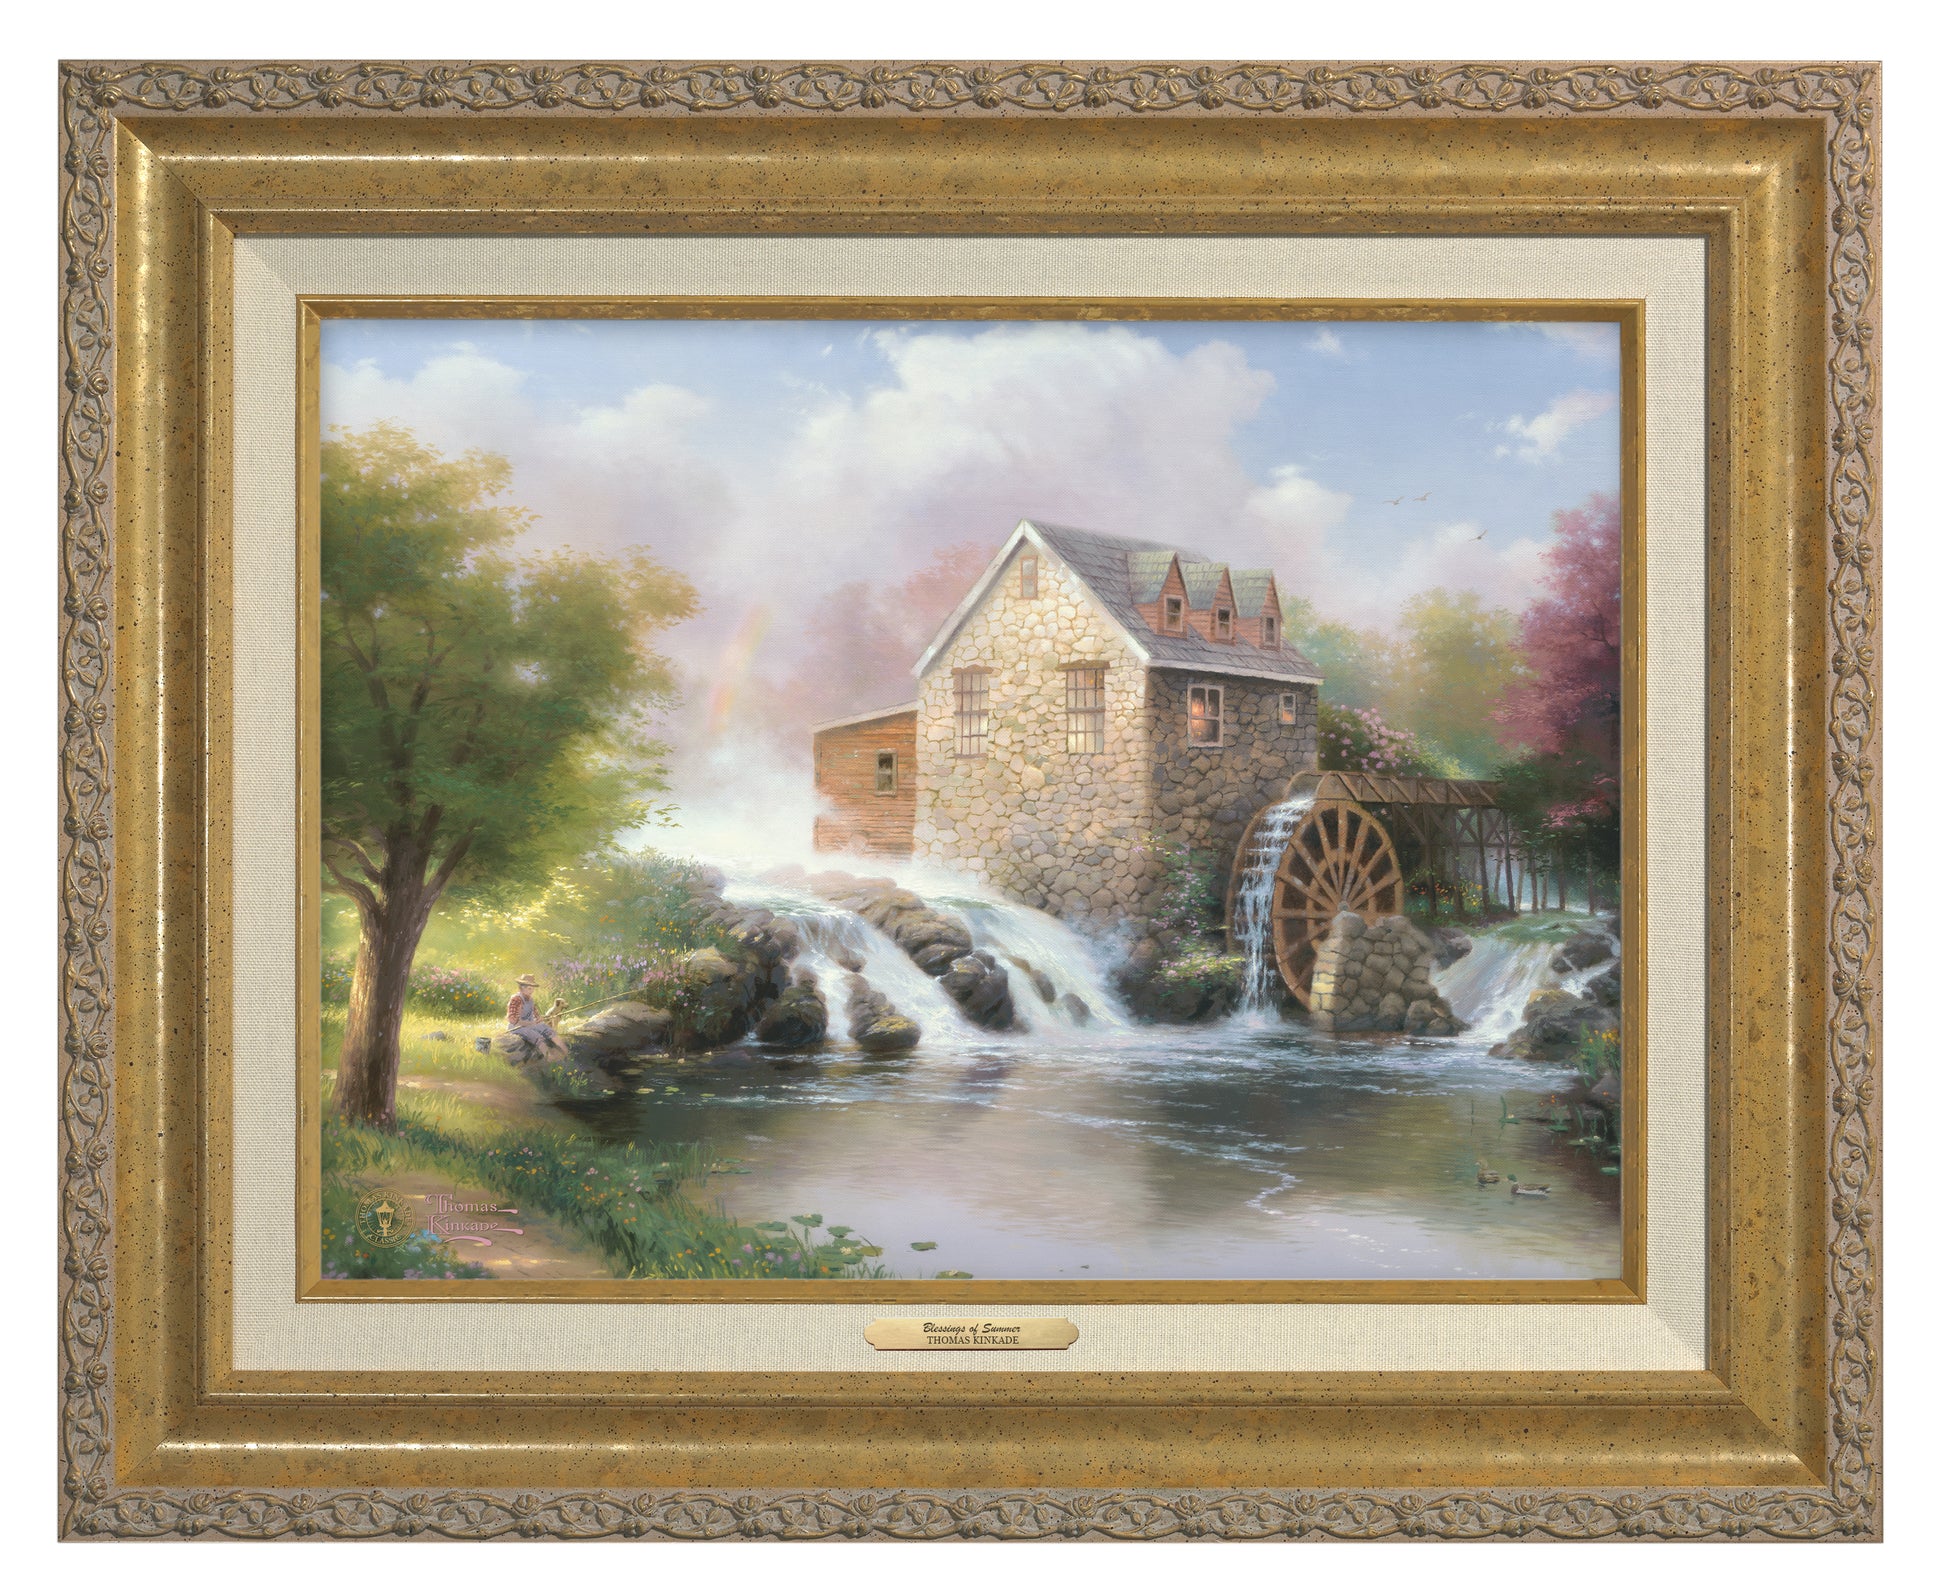 161894_CLF_Blessings of Summer 12X16 Classic - Gold.jpg